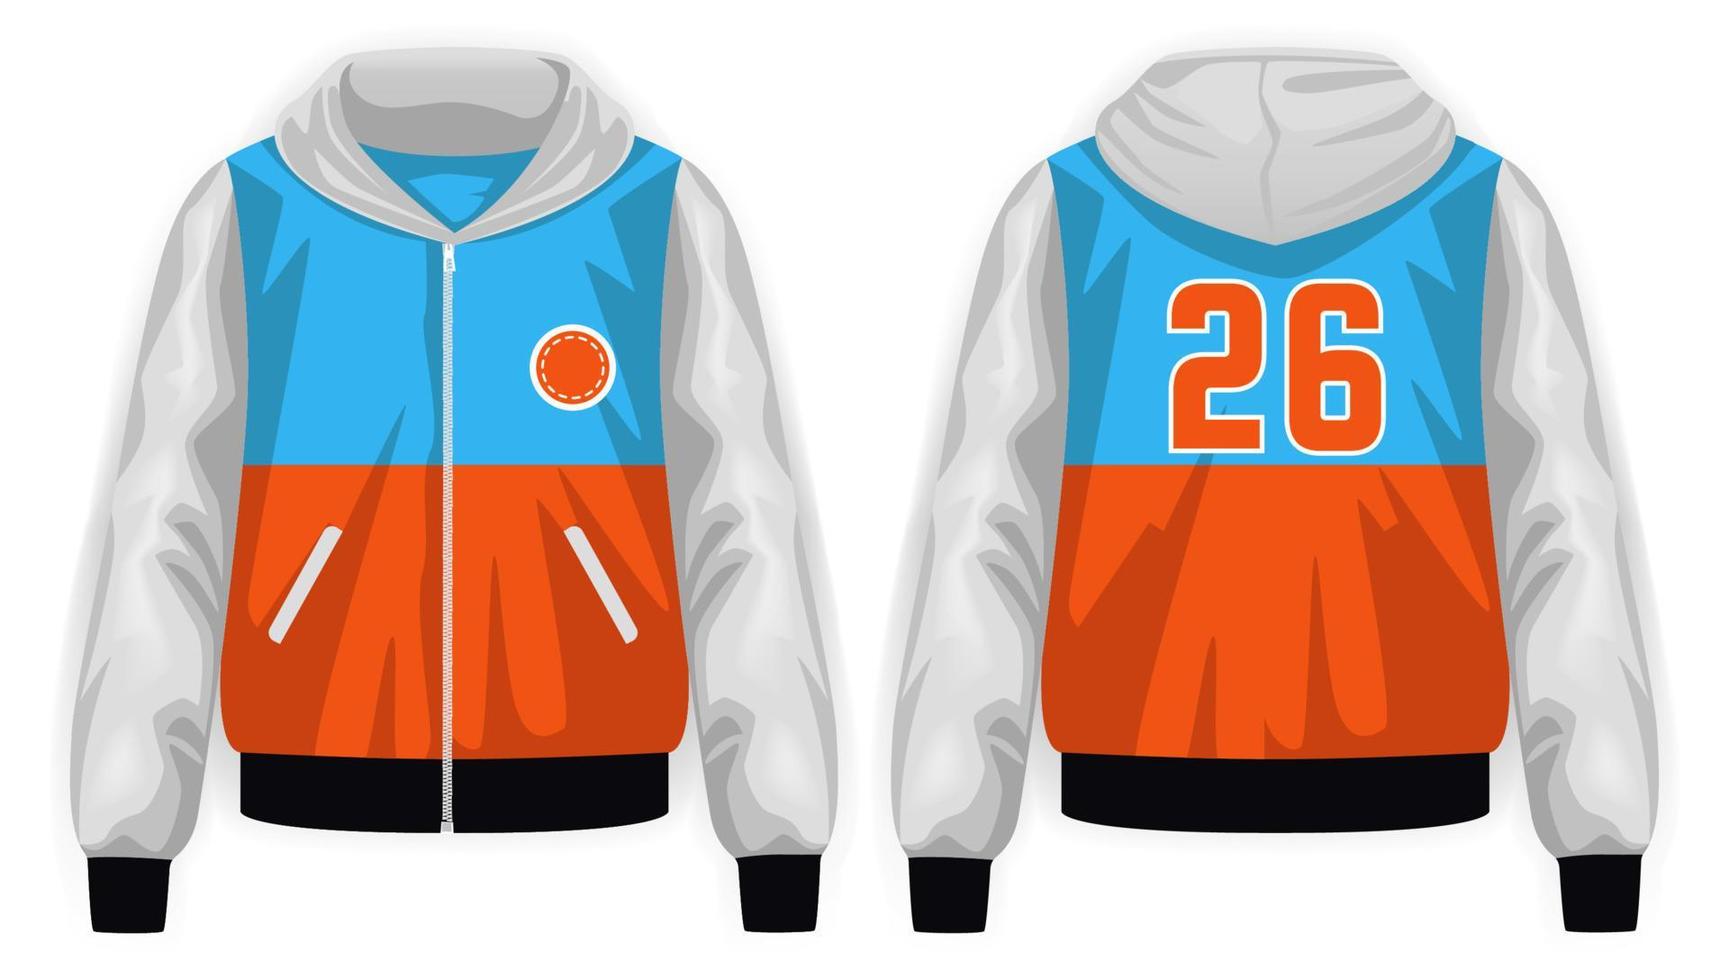 White, blue, orange and black varsity jacket with hoodie front and back view, vector mockup illustration